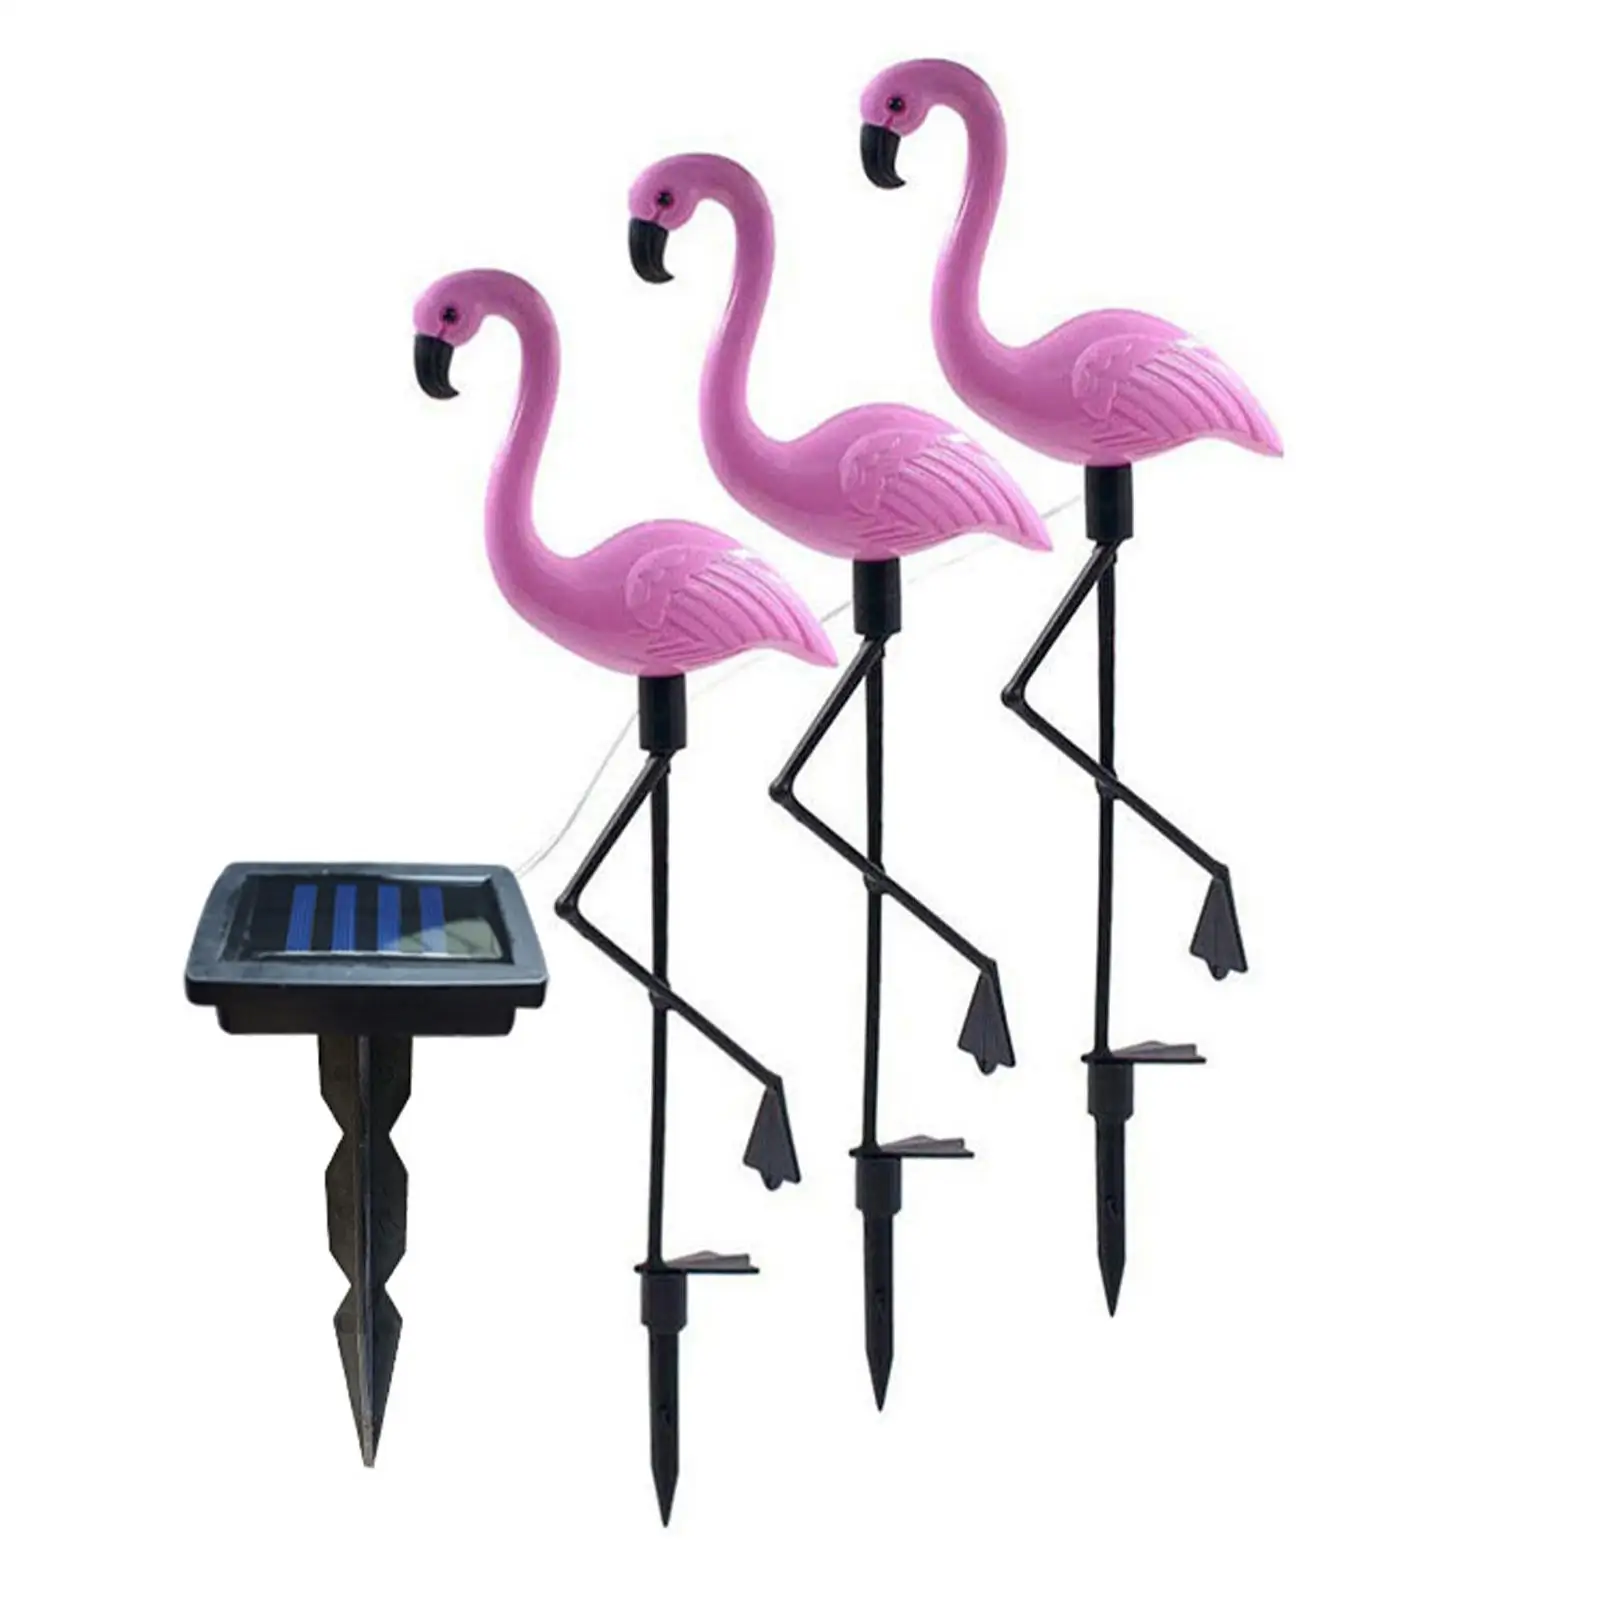 3 Pieces Flamingo Landscape Light Sturdy LED Lights Stake Light Waterproof Solar Power for Wedding Garden Lawn Outdoor